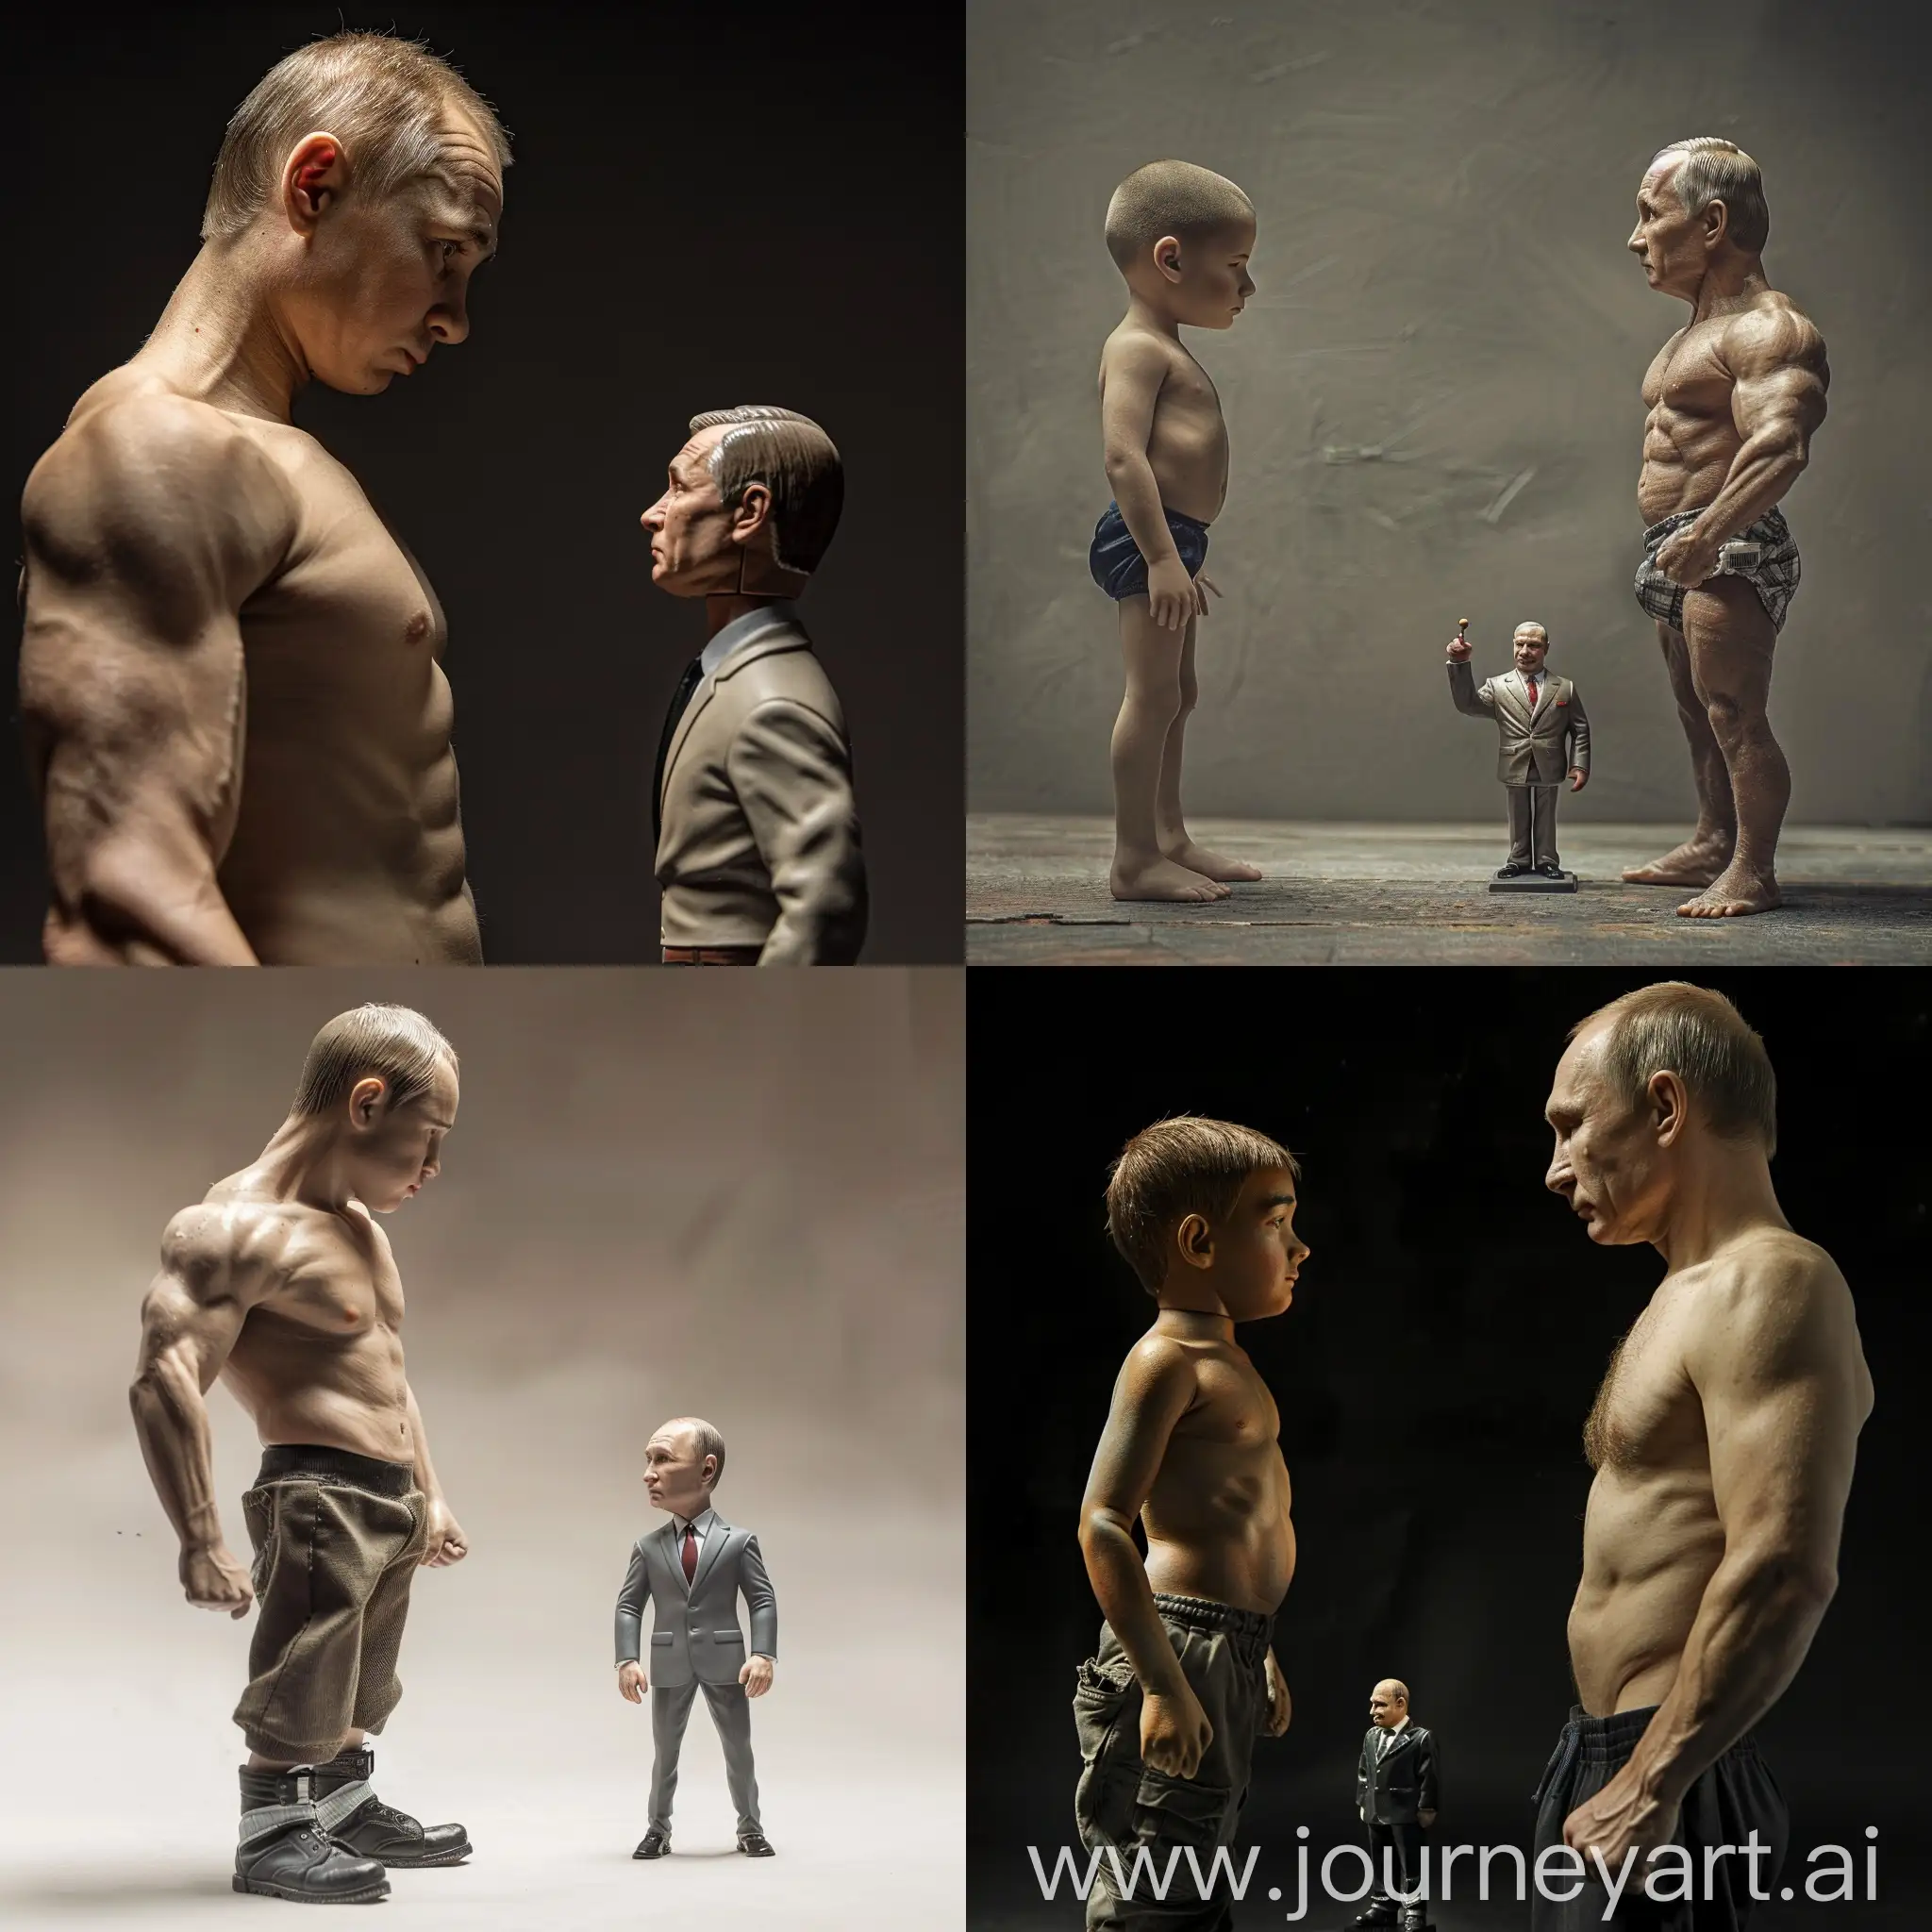 A 2 meter tall, muscular boy looks longingly at a small version of Vladimir Putin